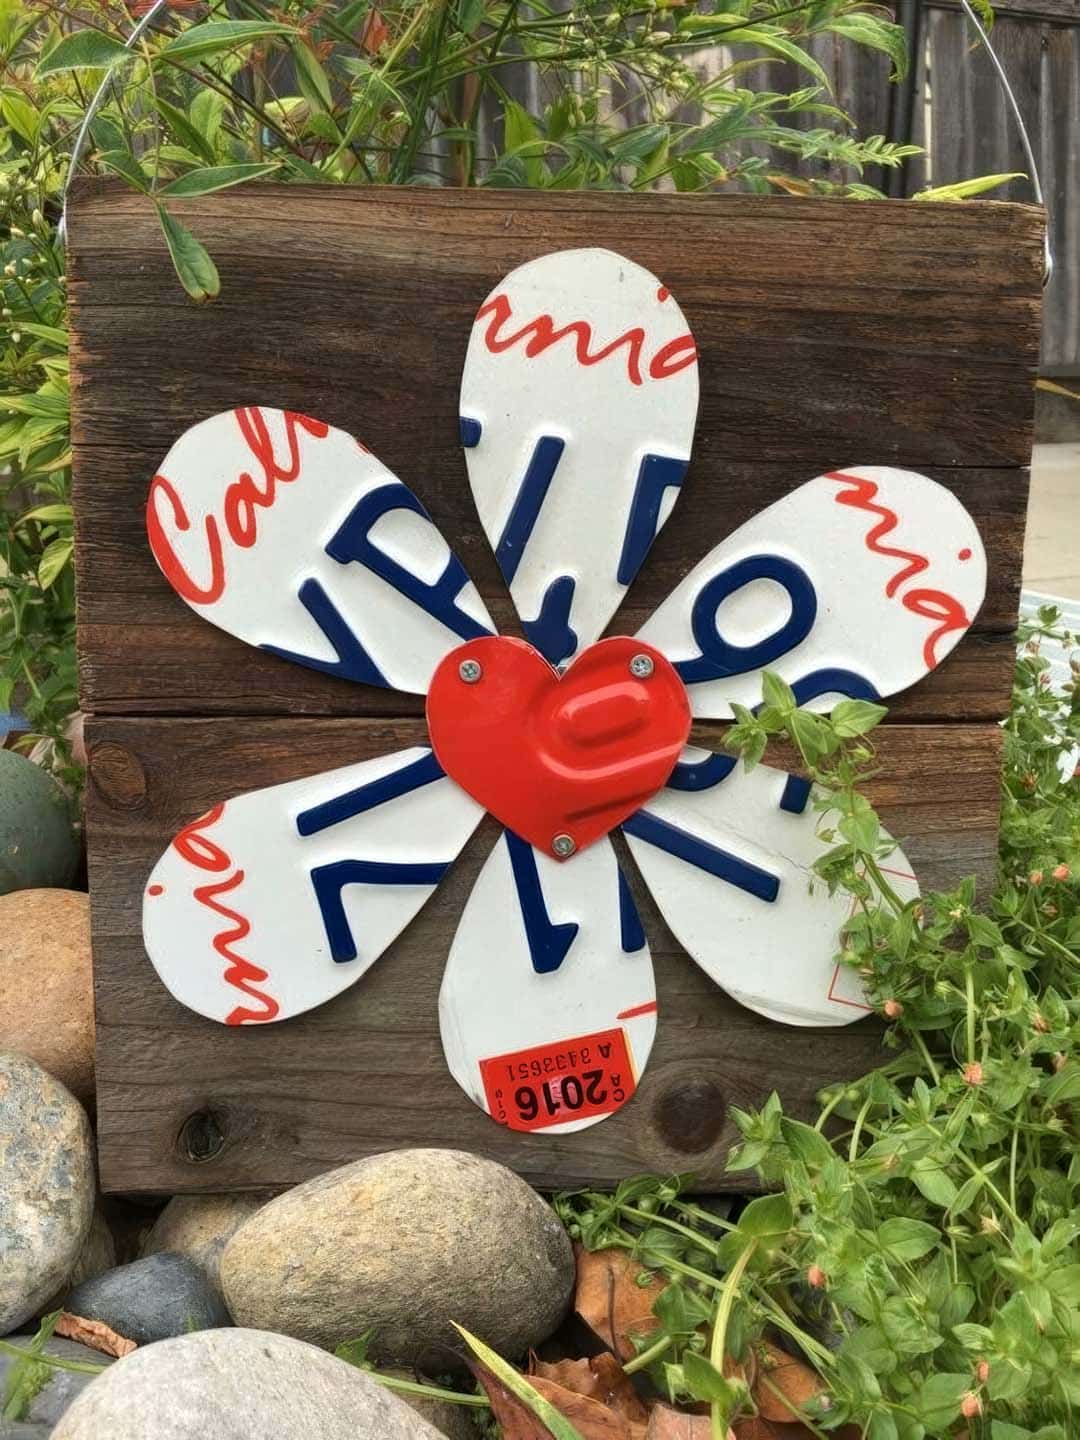 Lawn flower made from California license plates